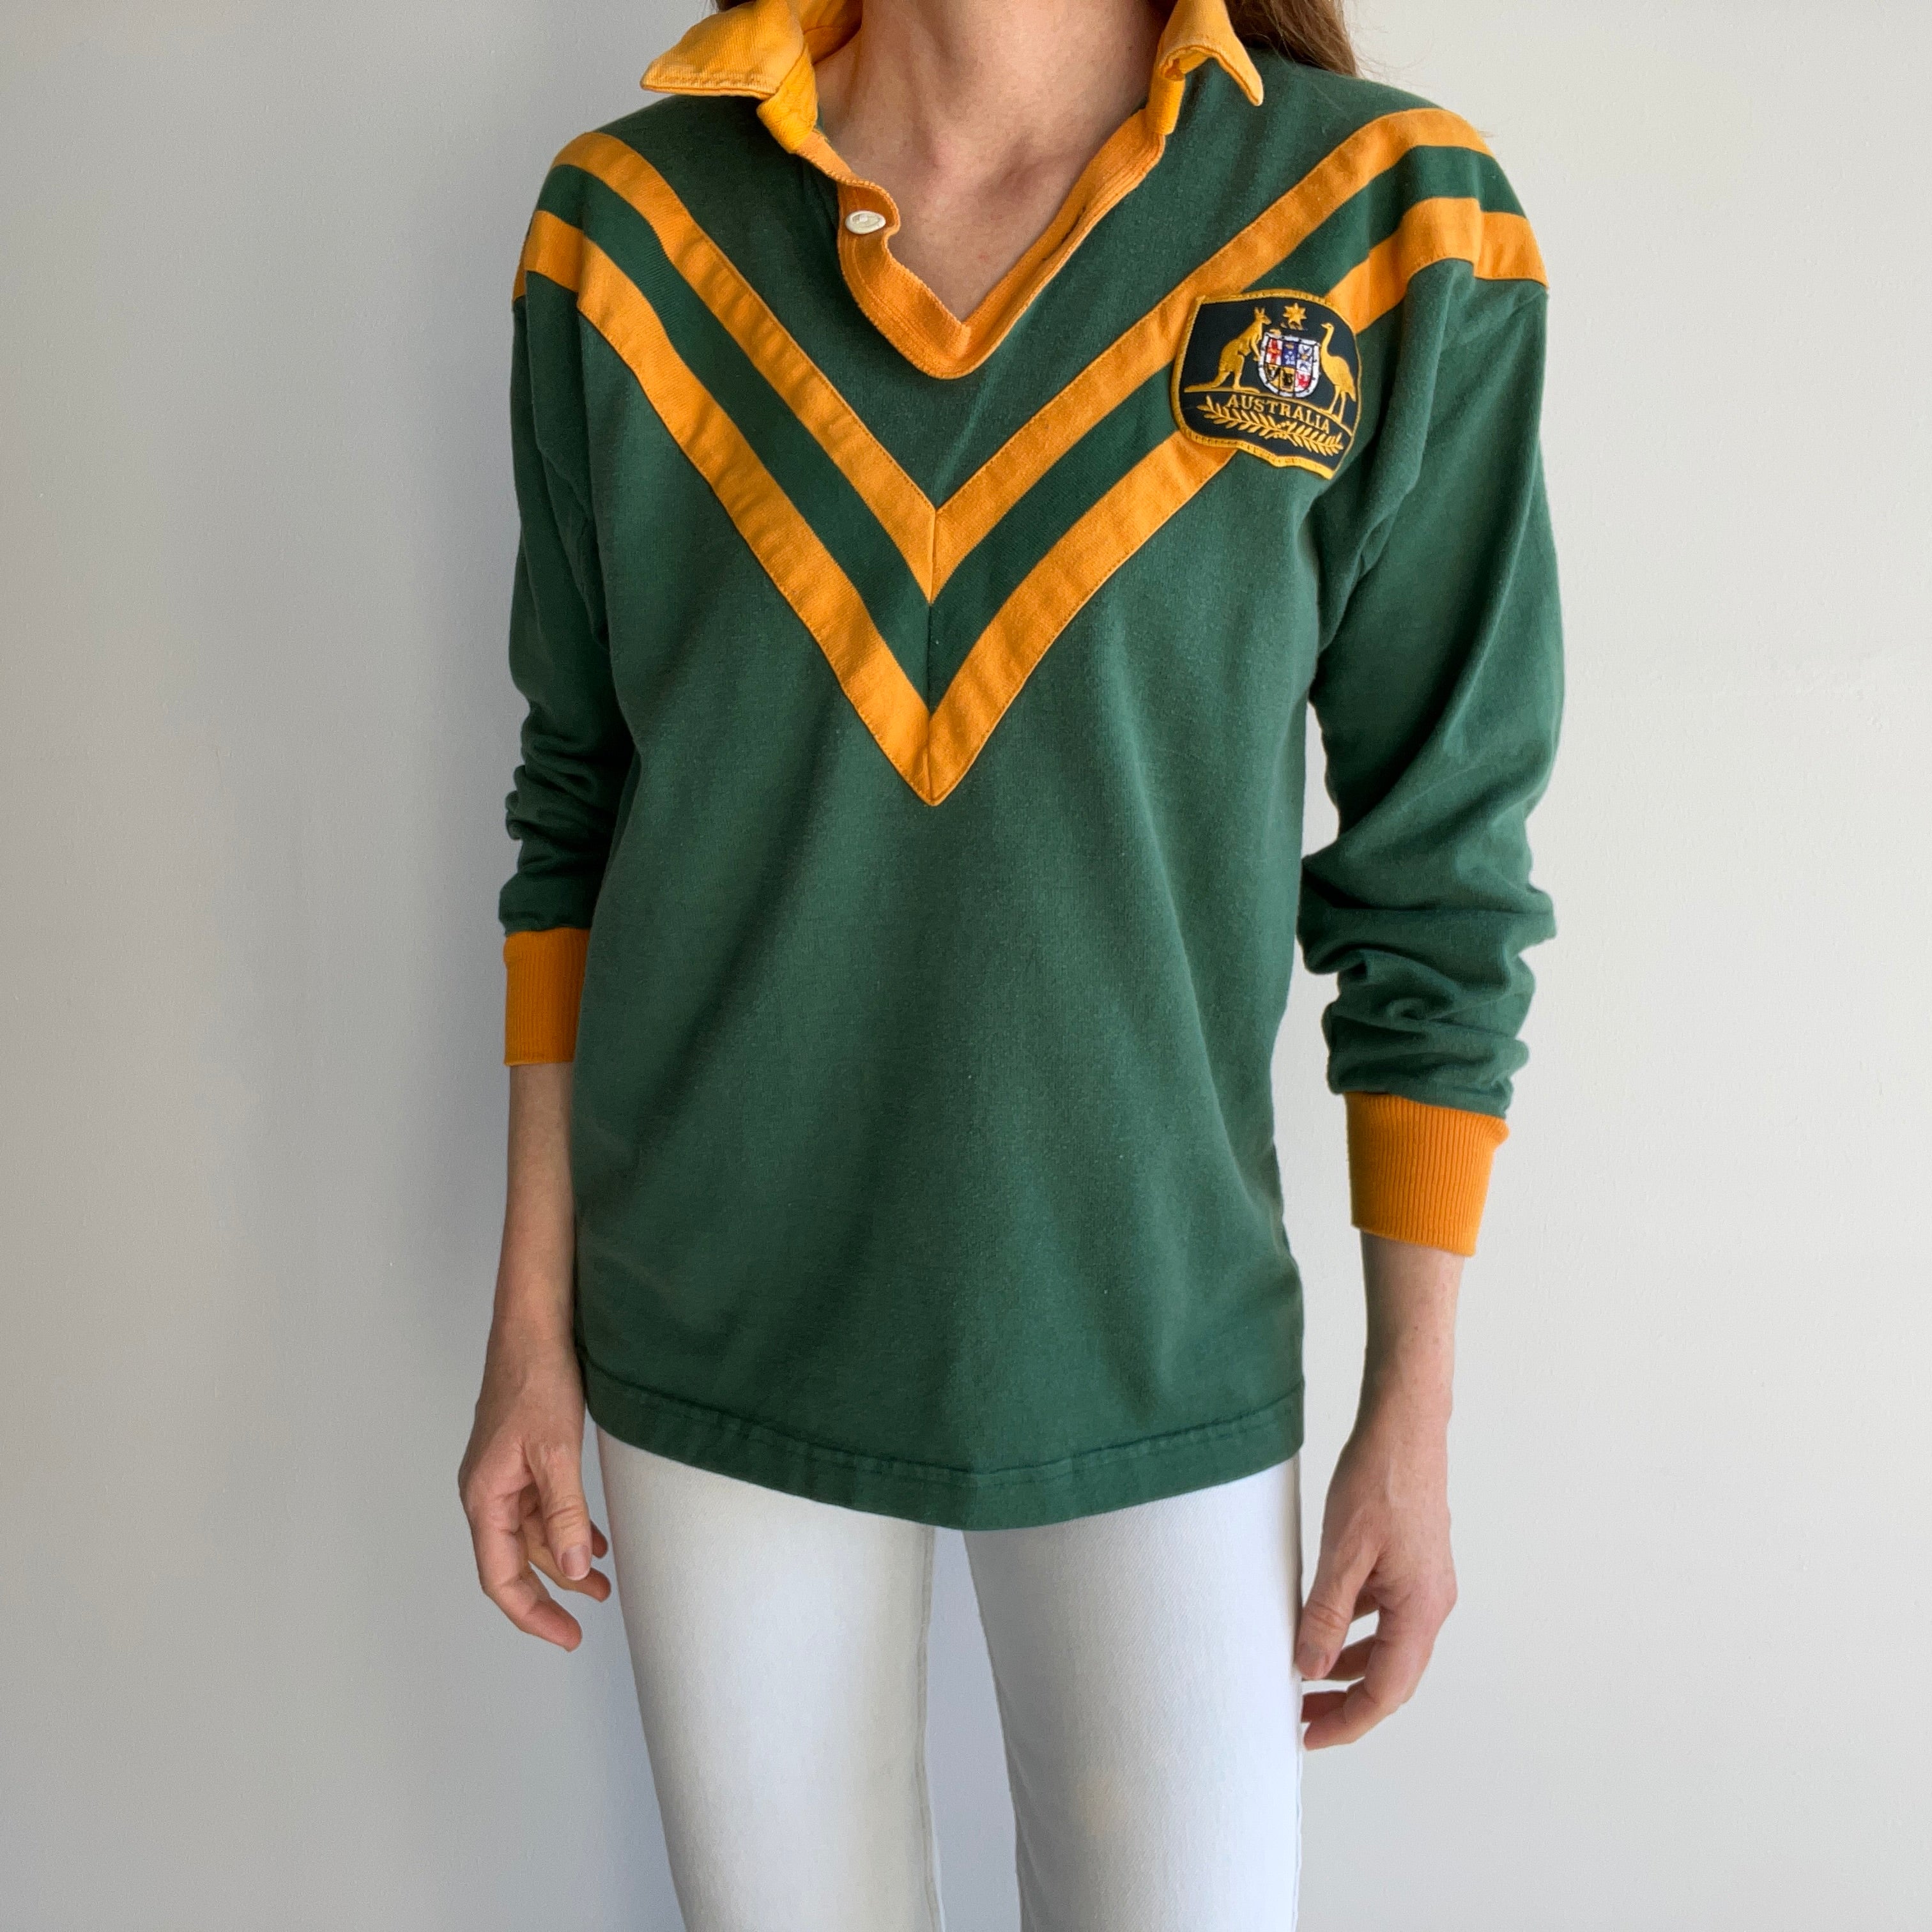 1980s Real Deal Australia Rugby Shirt